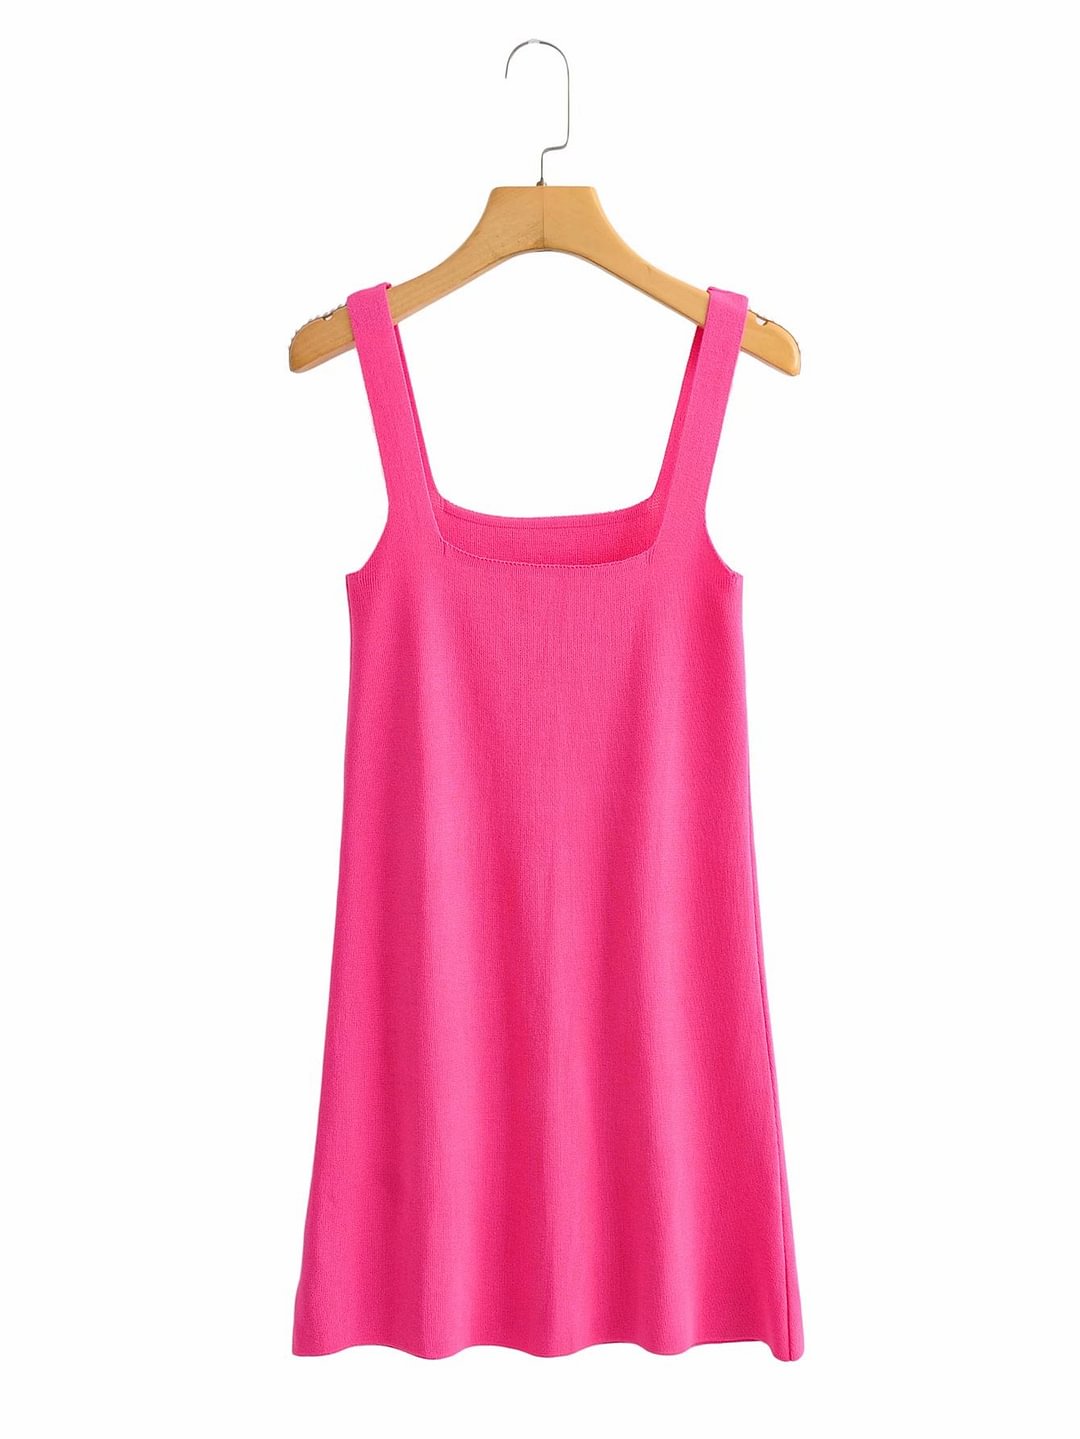 Toppies Summer Camisole Knitted Dress Sexy Rose Mini Dress Woman Vacation Beach Sundress